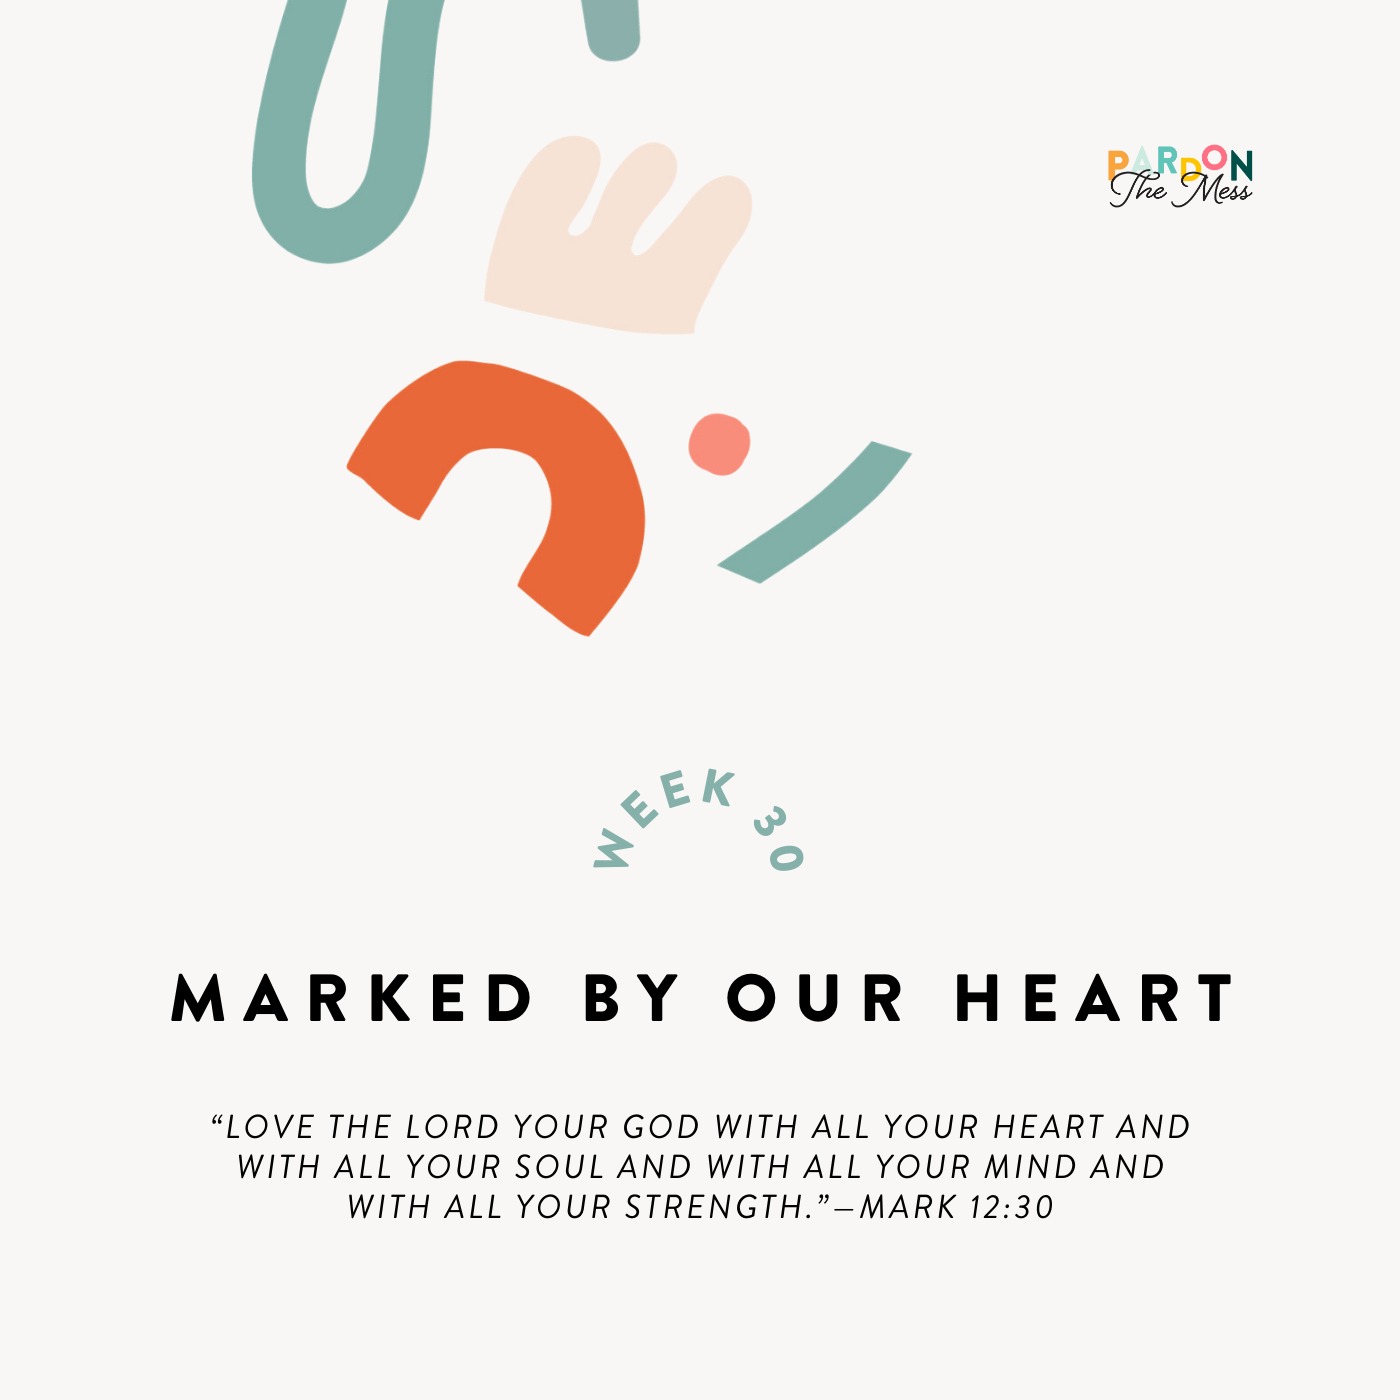 BONUS: Marked by Our Heart